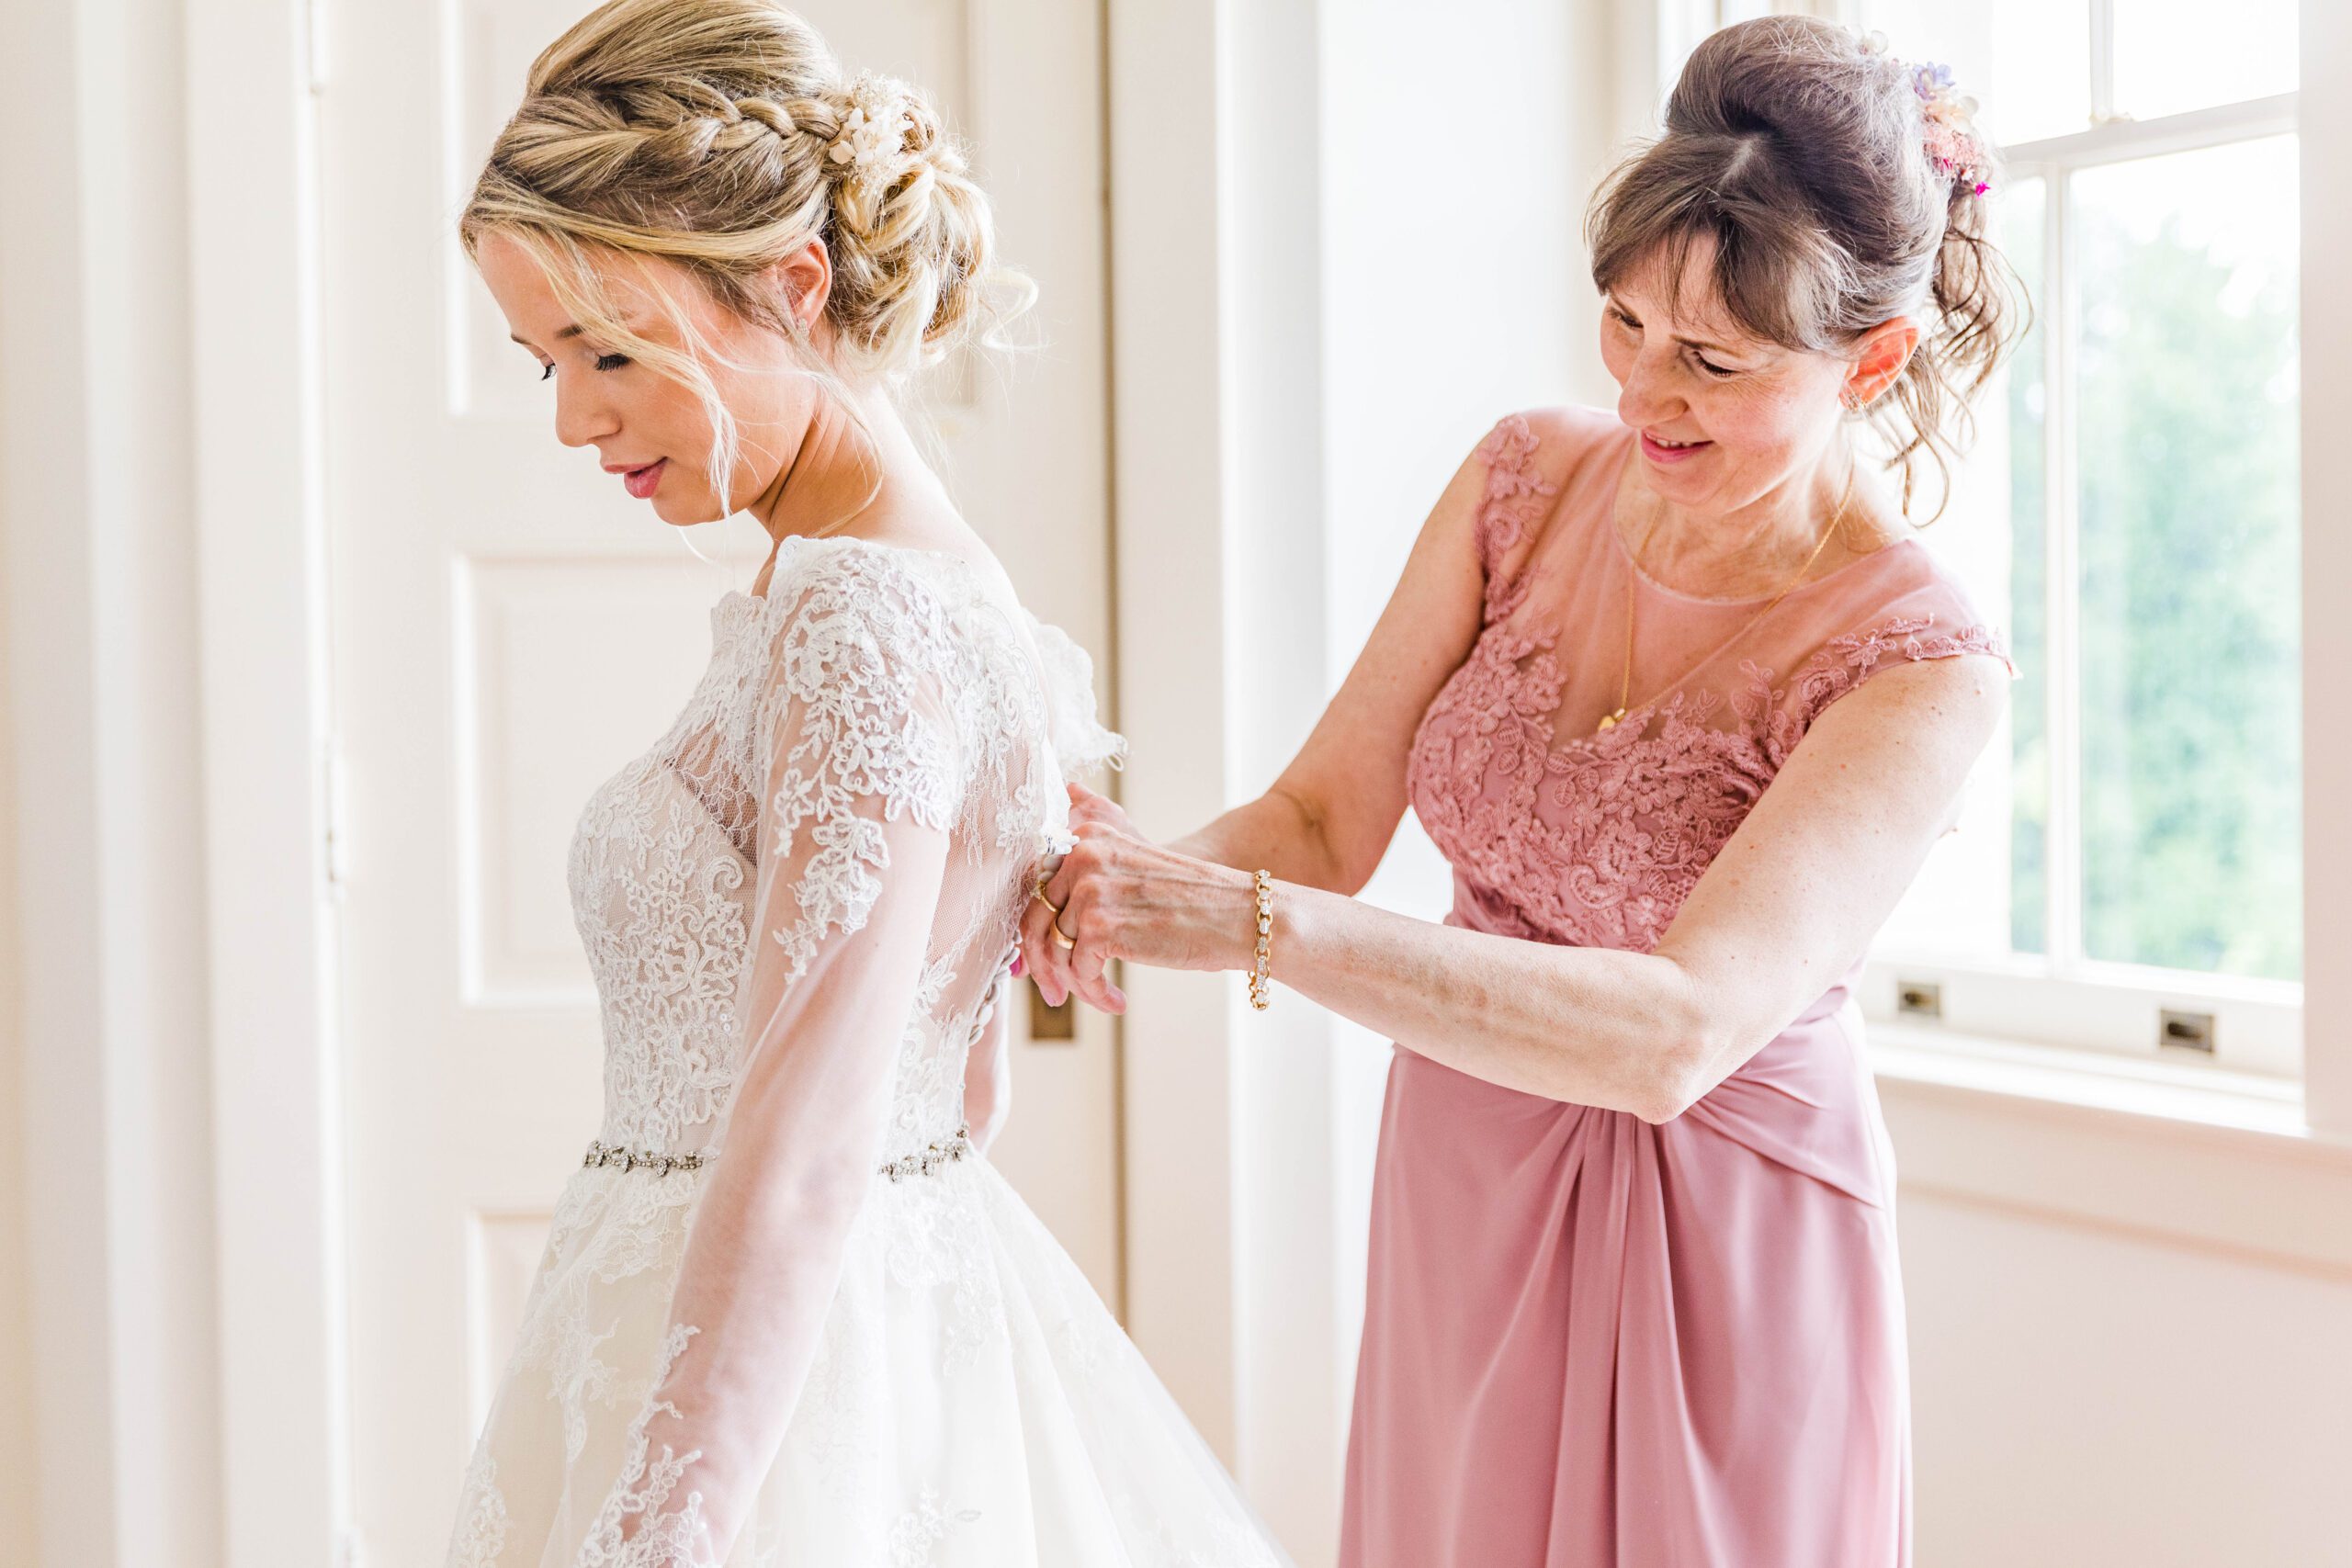 mother of the bride helping bride get dressed
